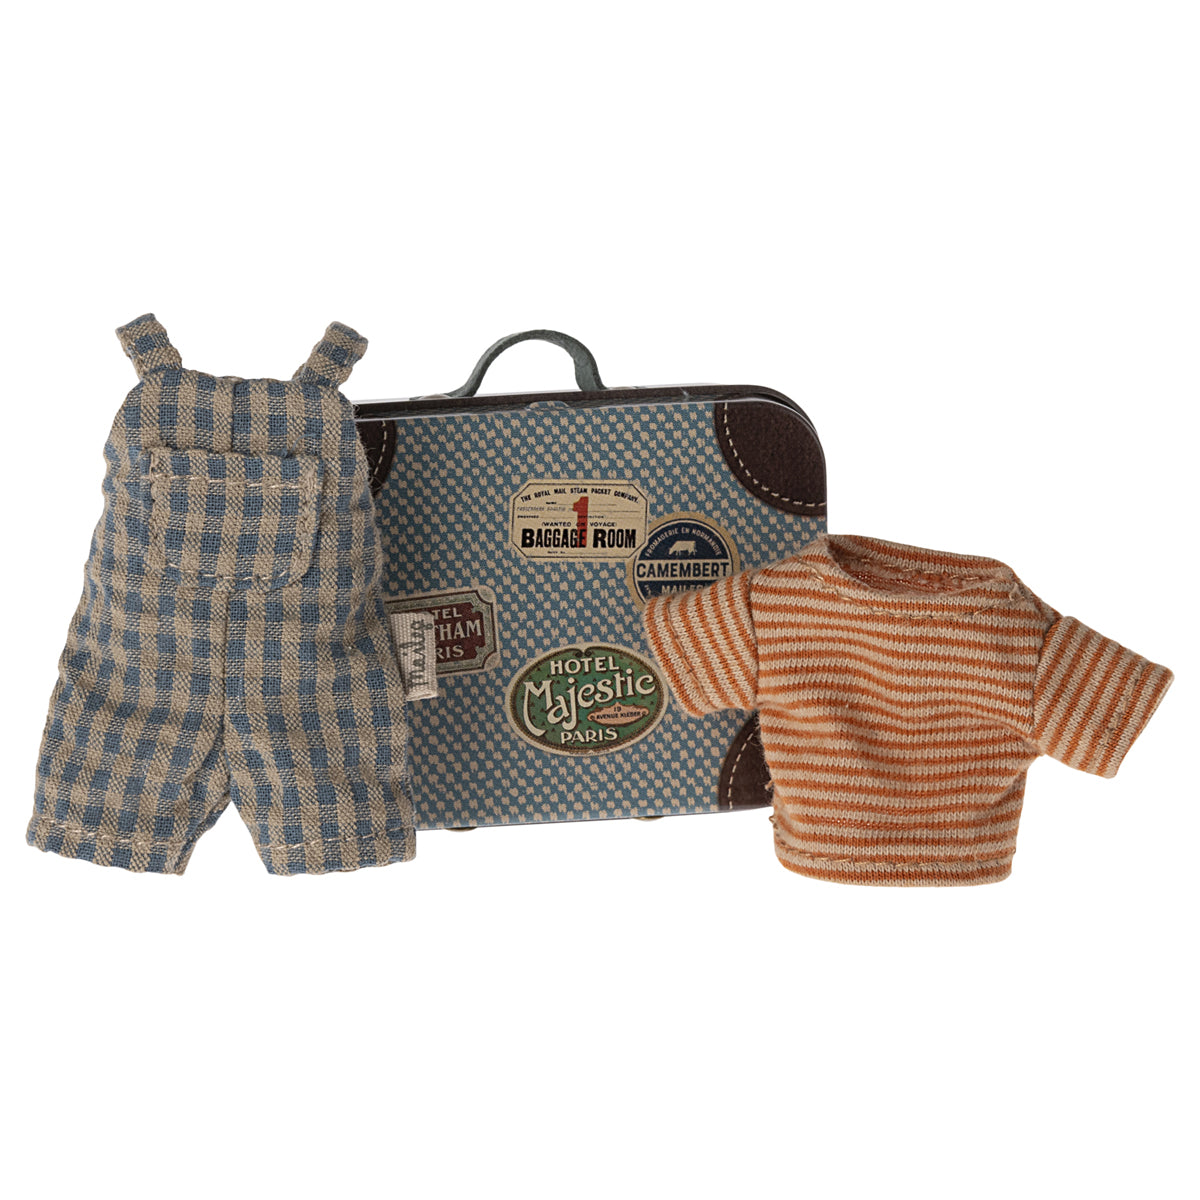 Maileg, Overalls and Shirt in Suitcase, Big Brother Mouse 17-4203-00